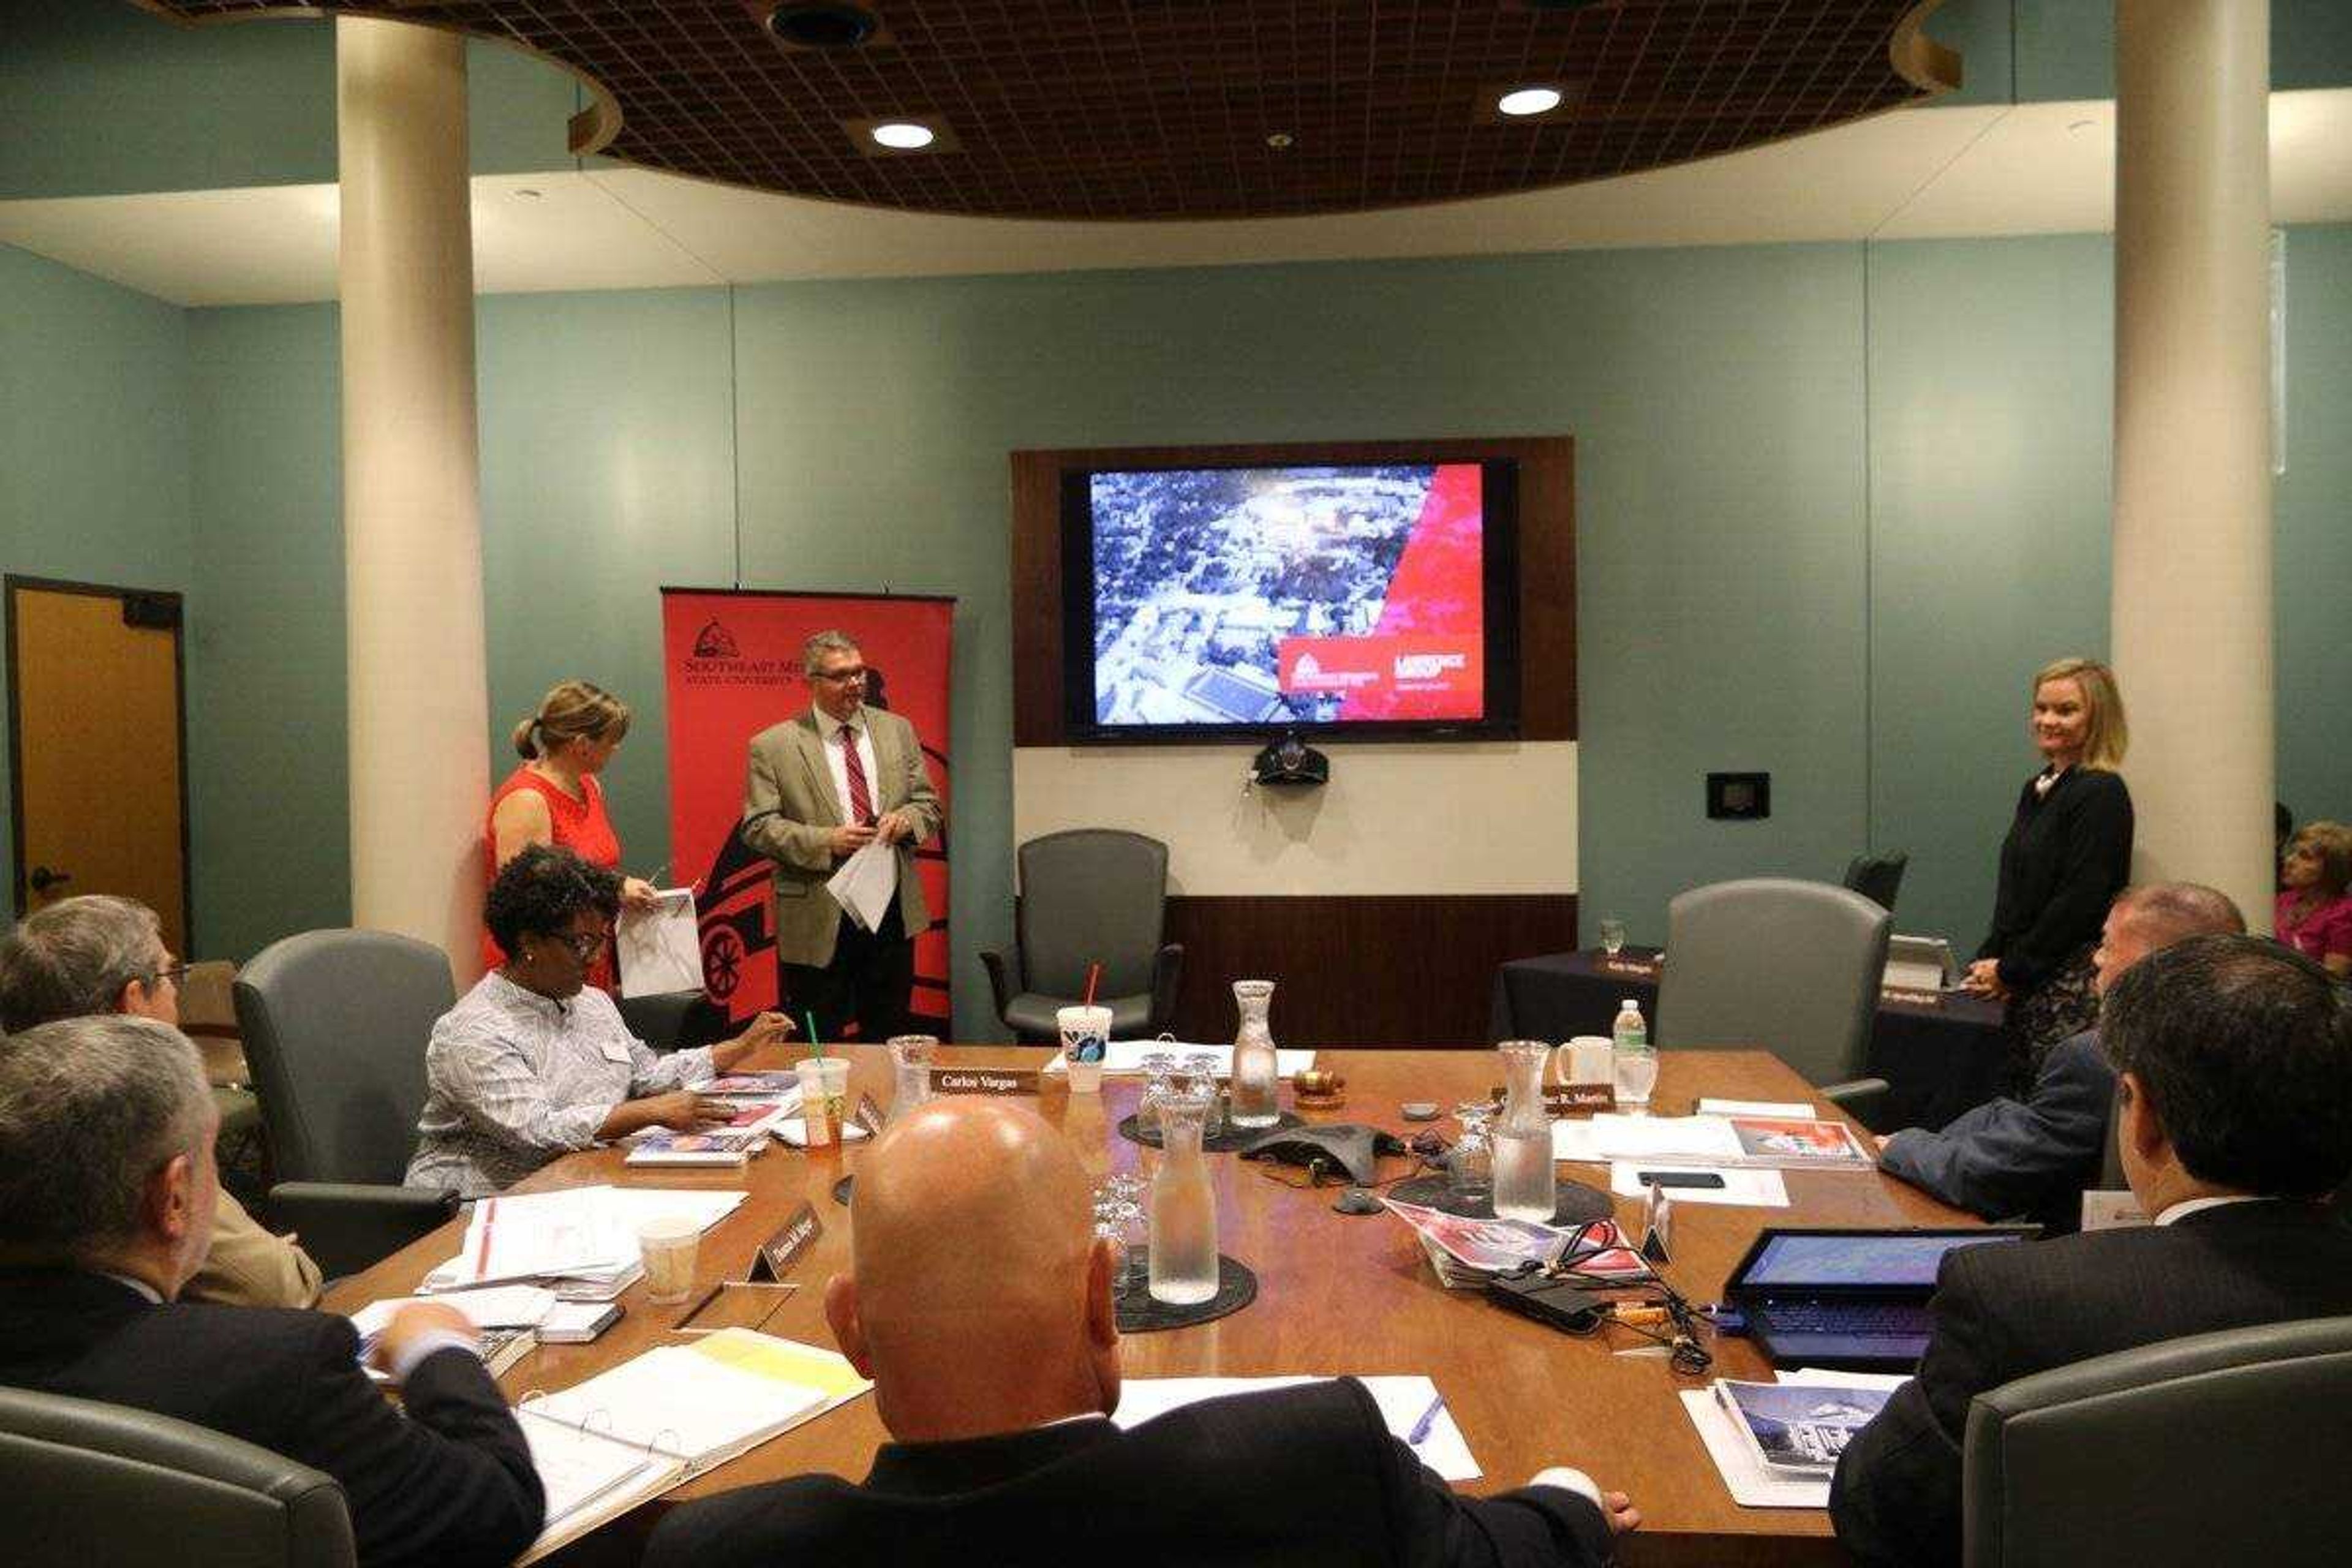 The Southeast Board of Regents met on Friday, Sept. 22 to discuss several campus updates.